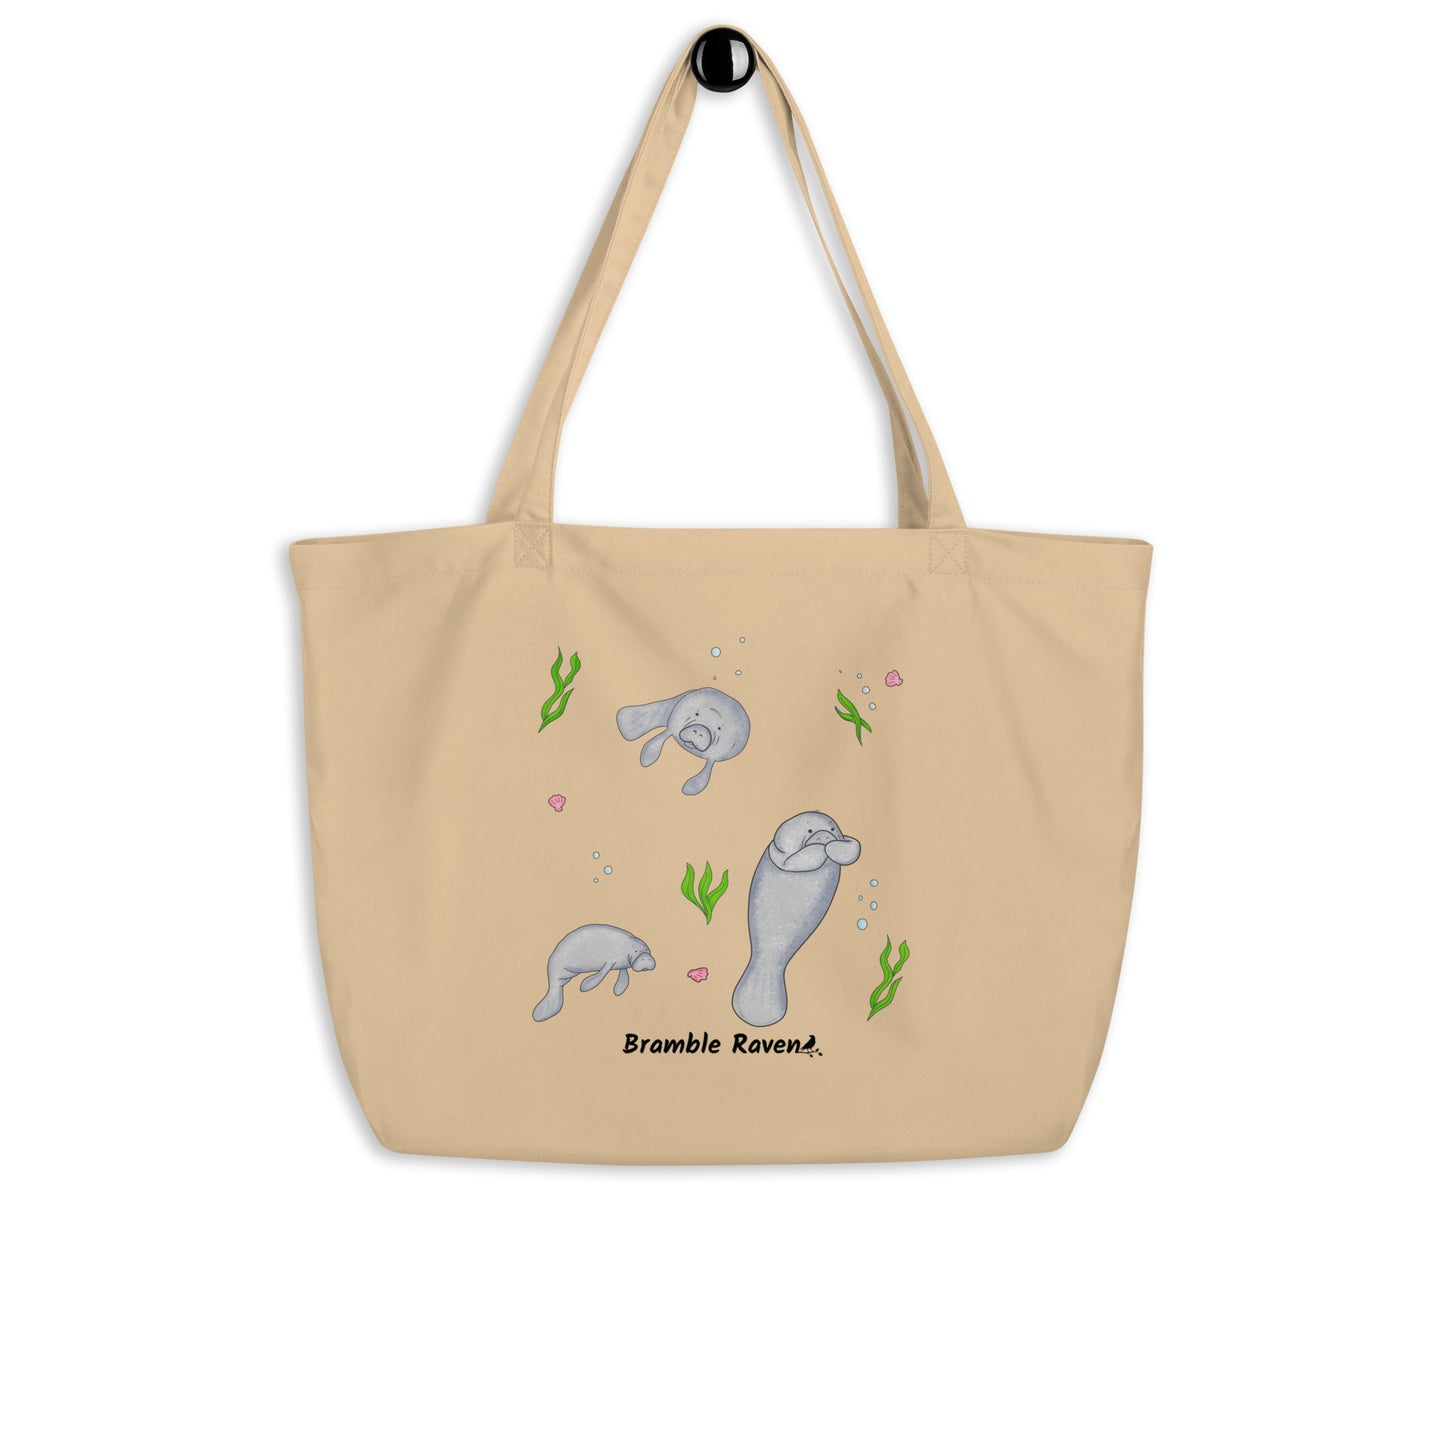 20″ × 14″ × 5″ 100% organic cotton tote bag. Features three manatees with accents of seashells, seaweed, and bubbles. Oyster colored fabric with dual handles. Shown hanging on a knob.